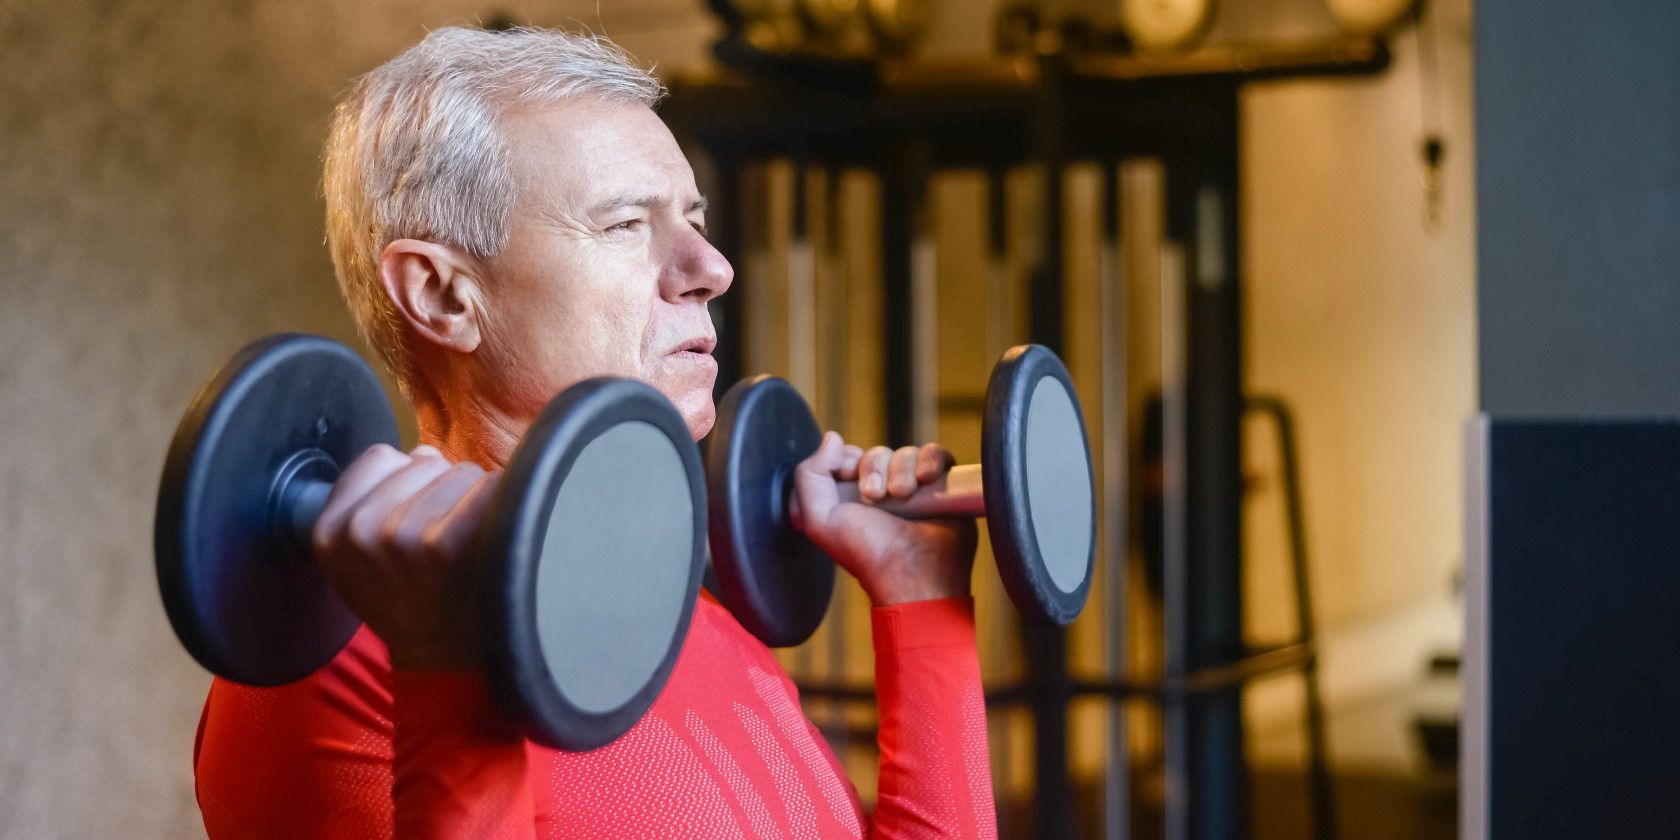 7 Online Workout Classes to Keep Seniors Fit and Healthy